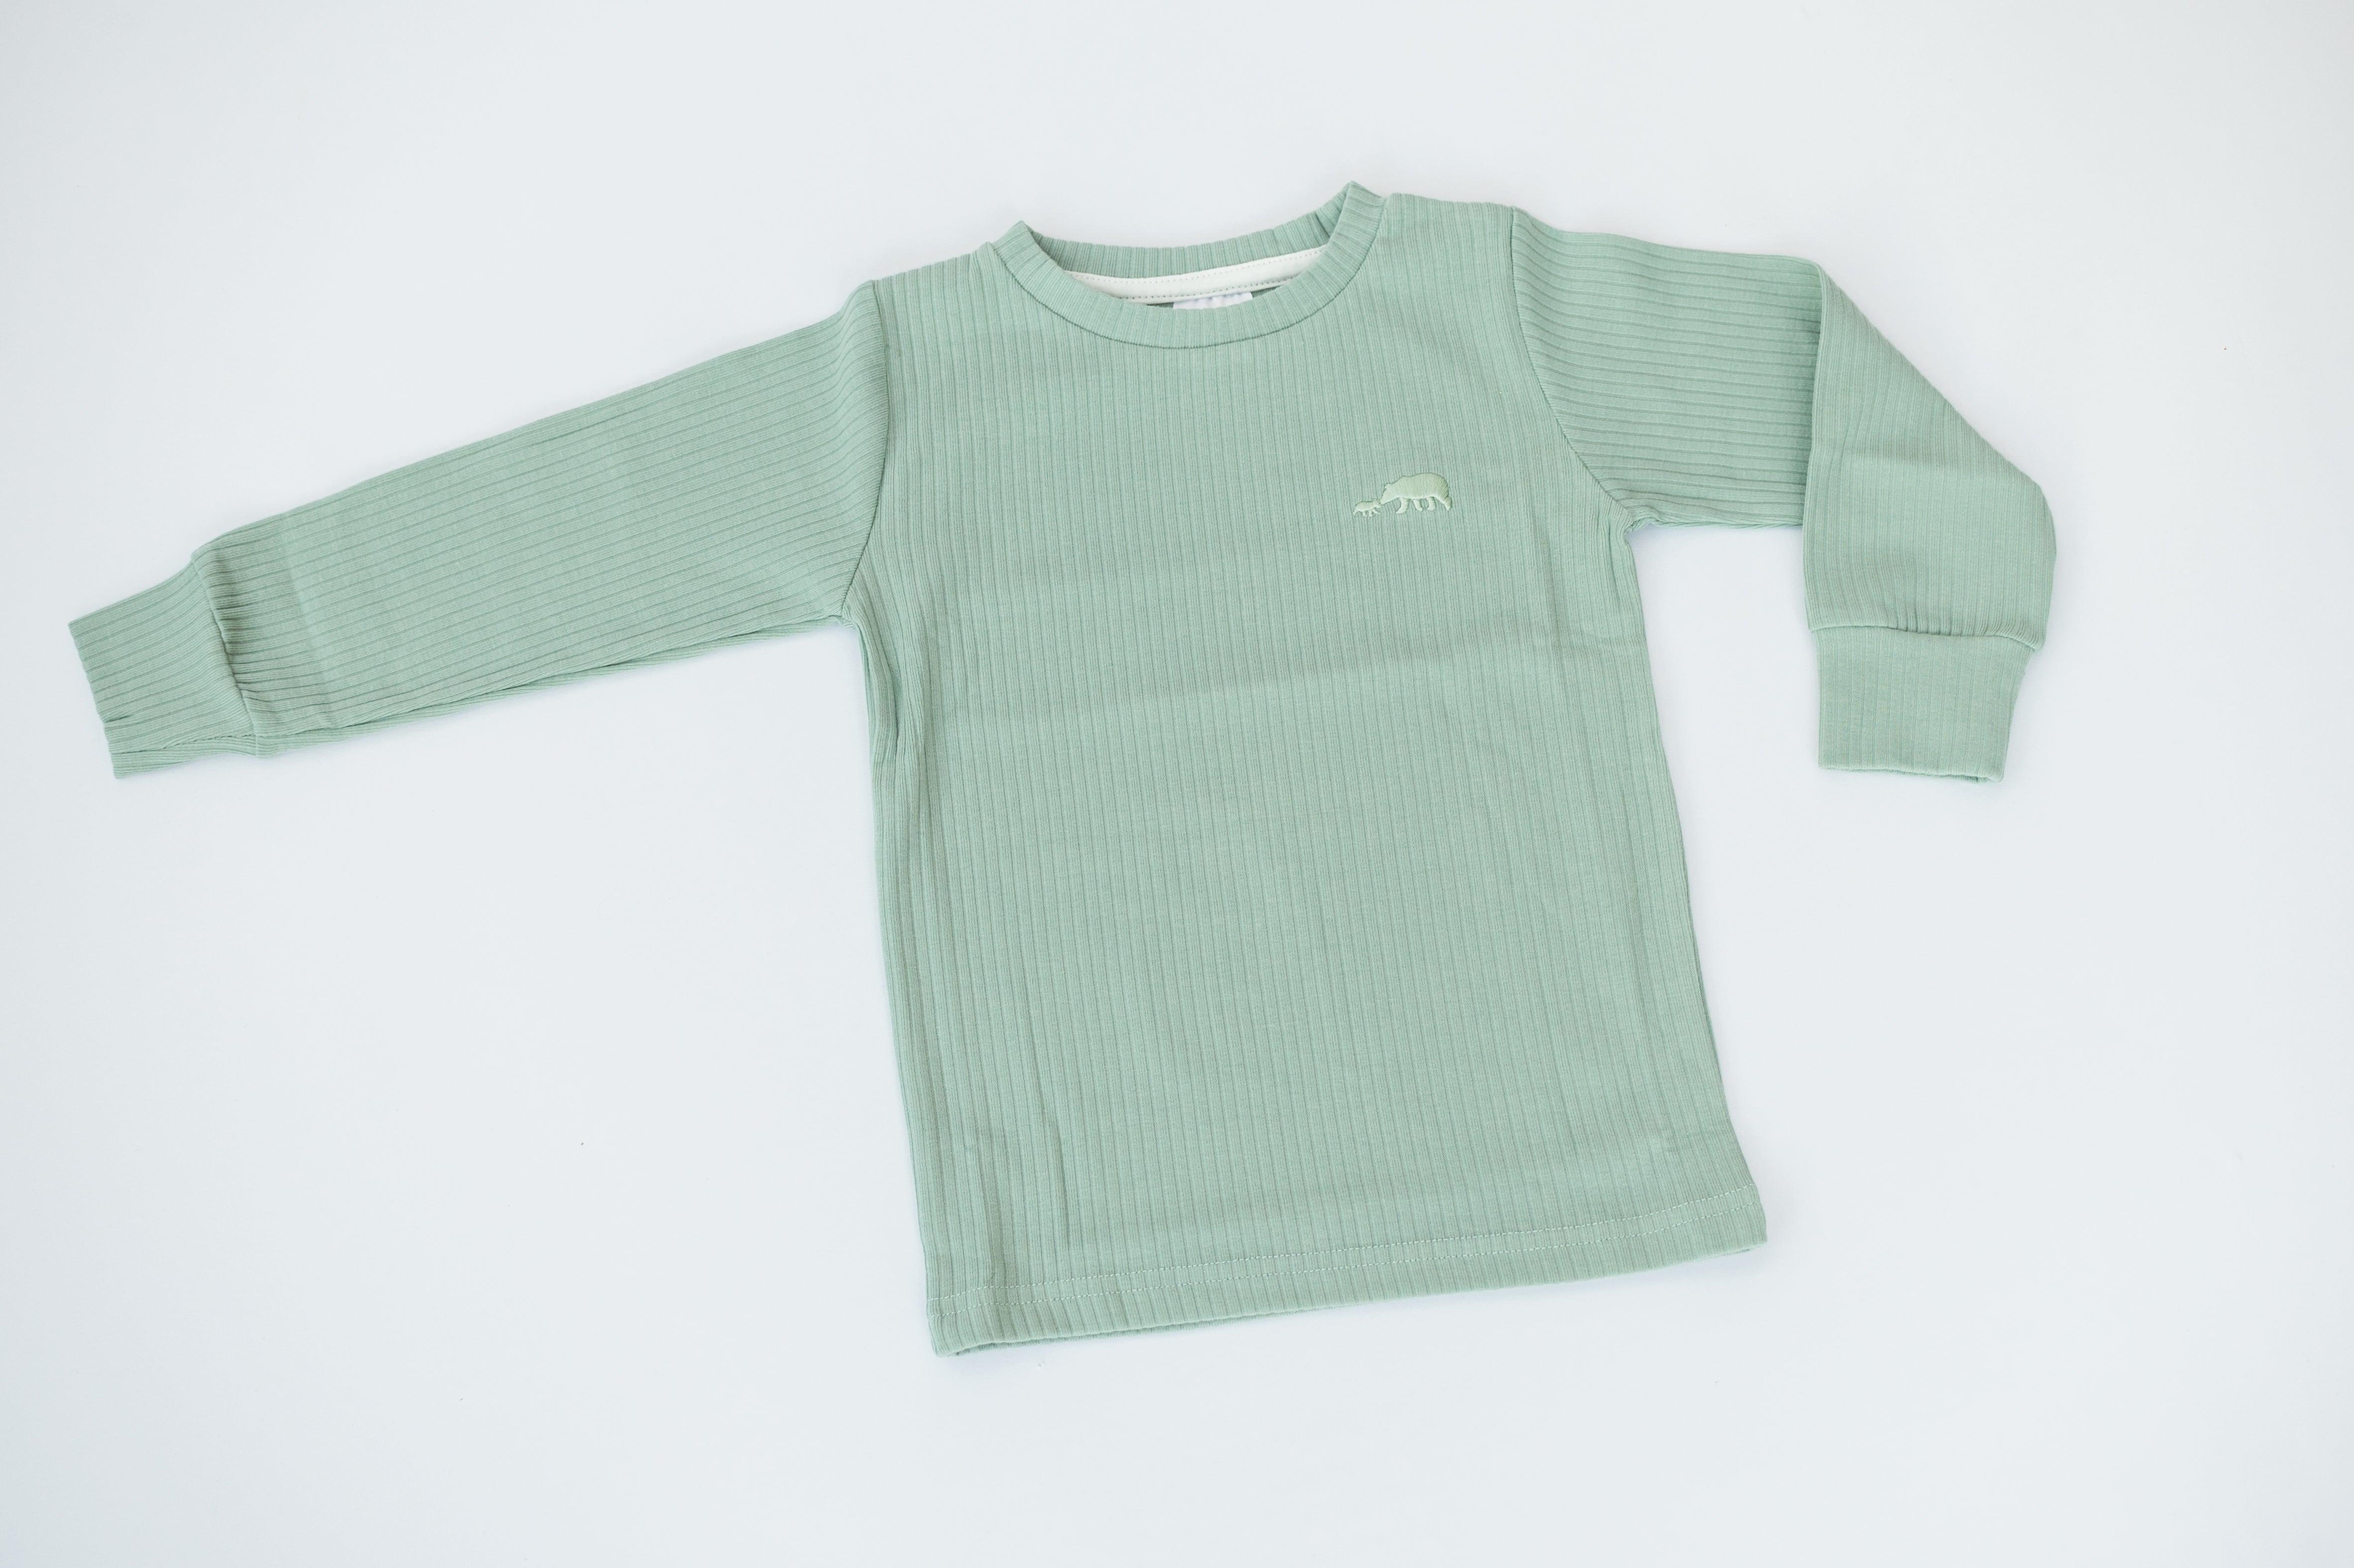 files/mint-ribbed-long-sleeve-top-claybearofficial-1.jpg